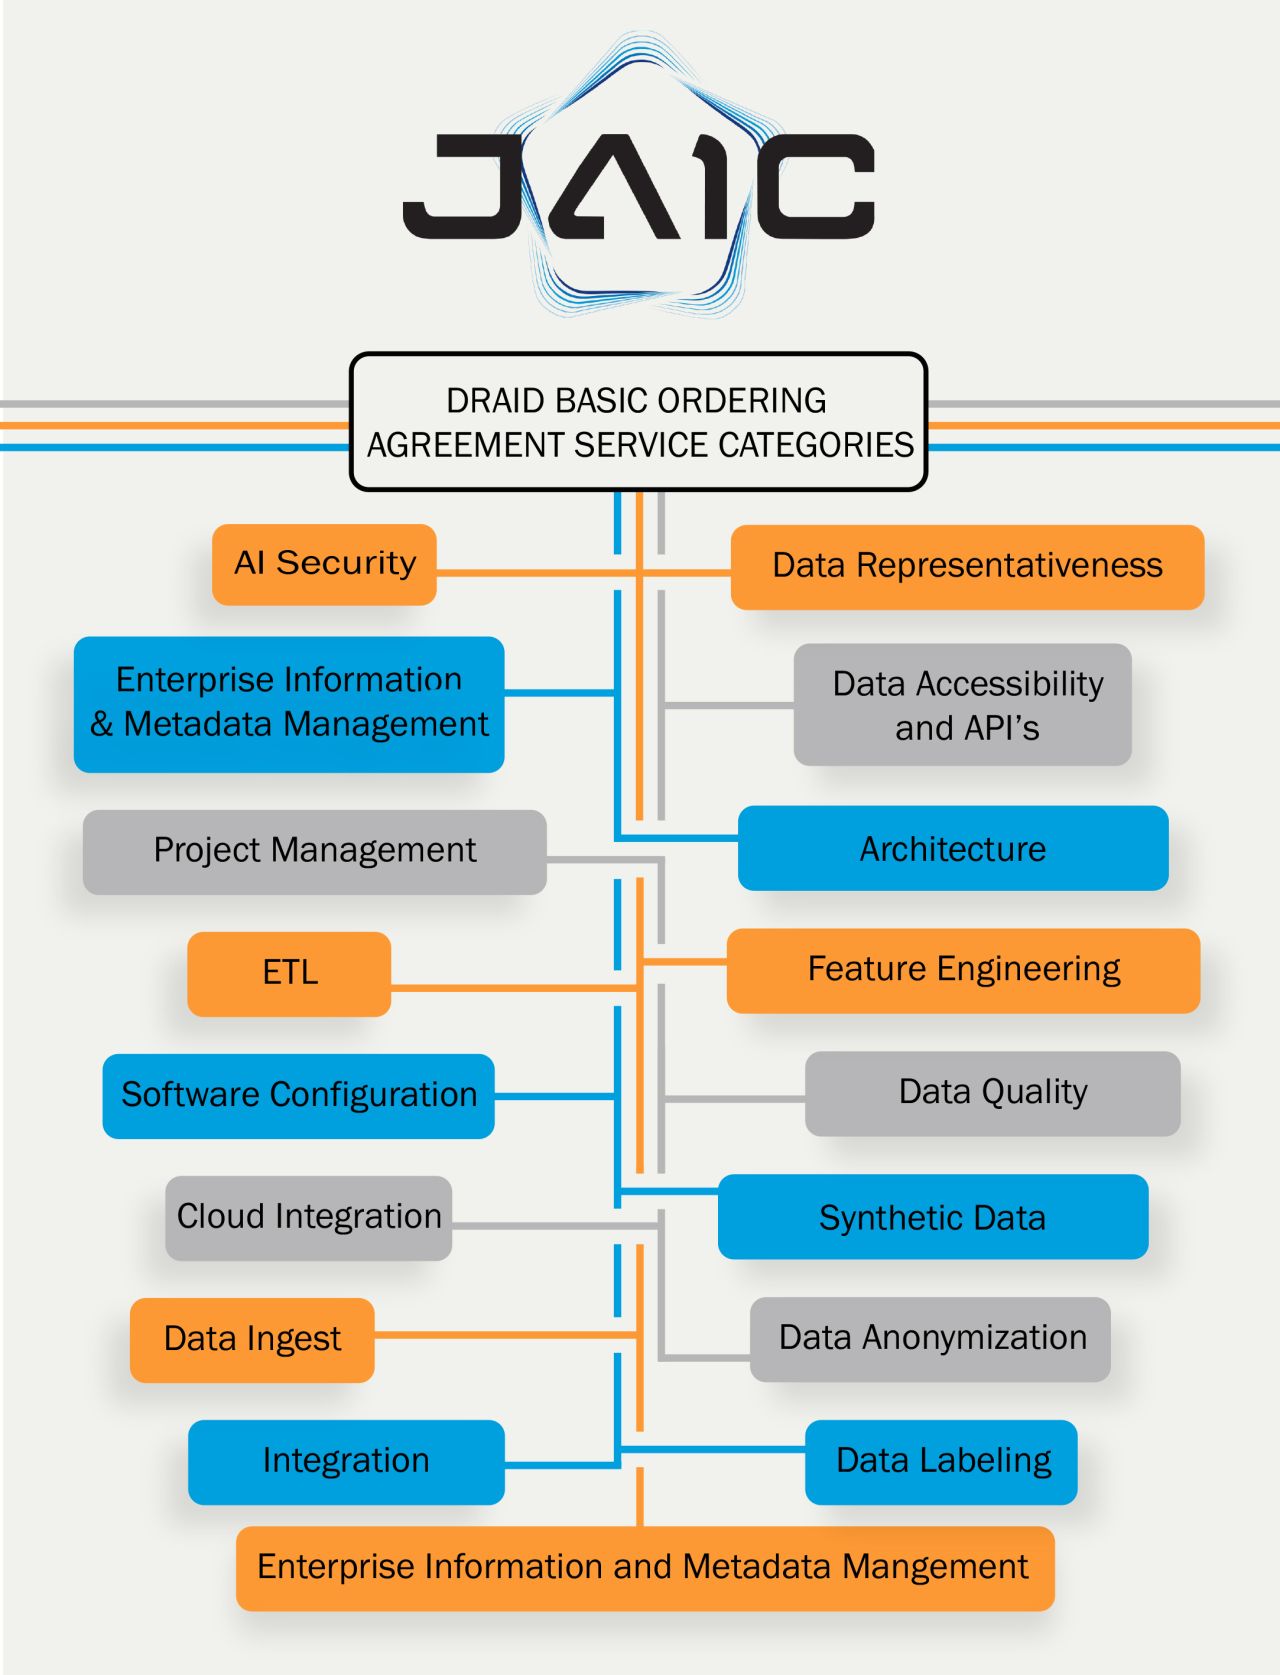 DRAID Basic Ordering Agreement Service Categories: AI Security, Data Representativeness, Enterprise Information & Metadata Management, Data Accessibility and API's, Project Managment, Architecture, ETL, Feature Engineering, Software Configuration, Data Quality, Cloud Integration, Synthetic Data, Data Ingest, Data Anonymization, Integration, Data Labeling, Enterprise Information and Metadata Management